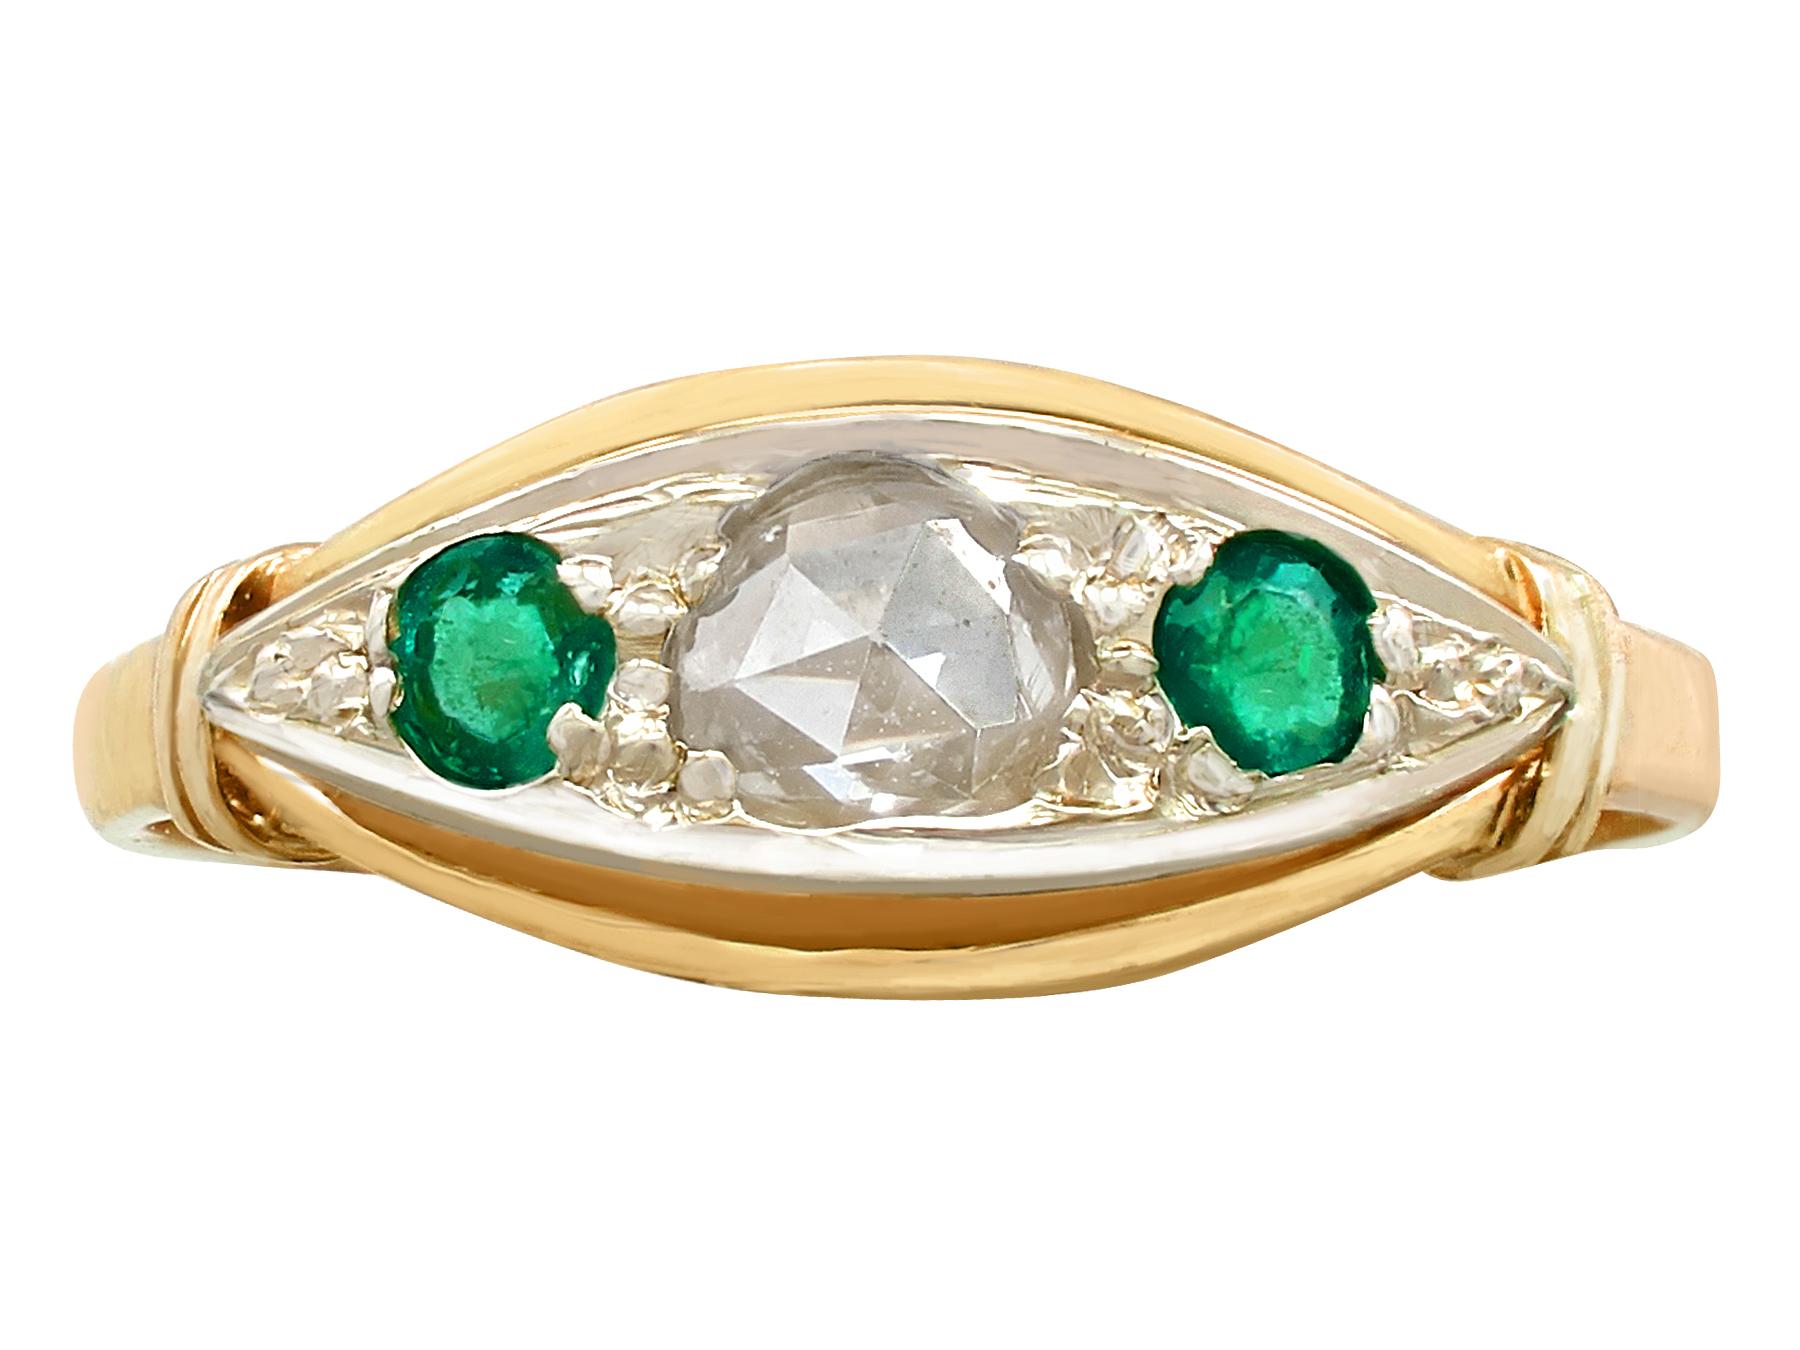 A fine antique 1930s 0.18 carat emerald and 0.30 carat diamond, 18 karat yellow gold and silver set dress ring; part of our diverse antique jewelry and estate jewelry collections.

This fine antique emerald and diamond ring has been crafted in 18k